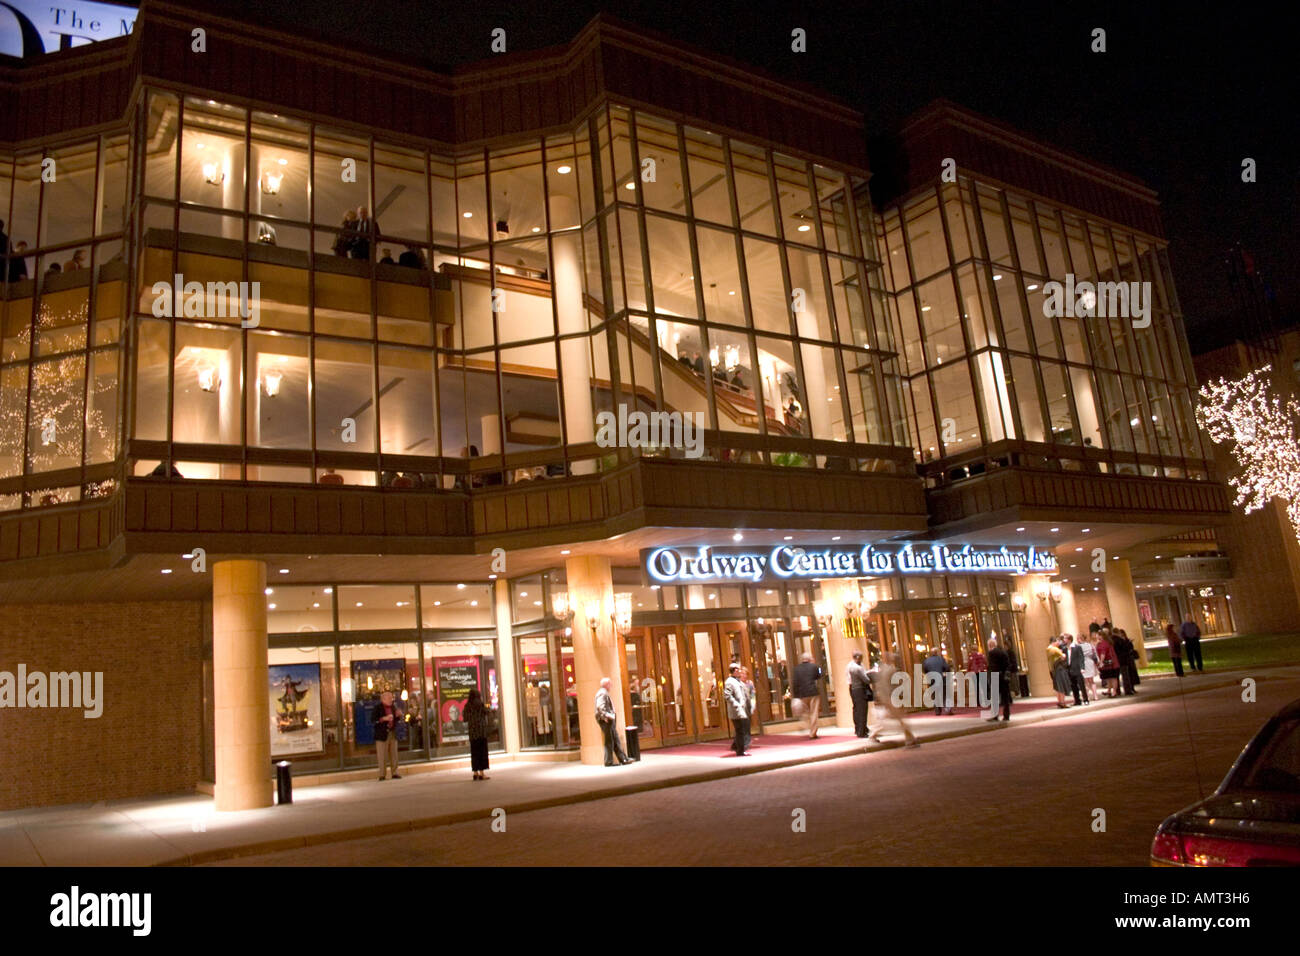 Ordway center for the performing arts hires stock photography and